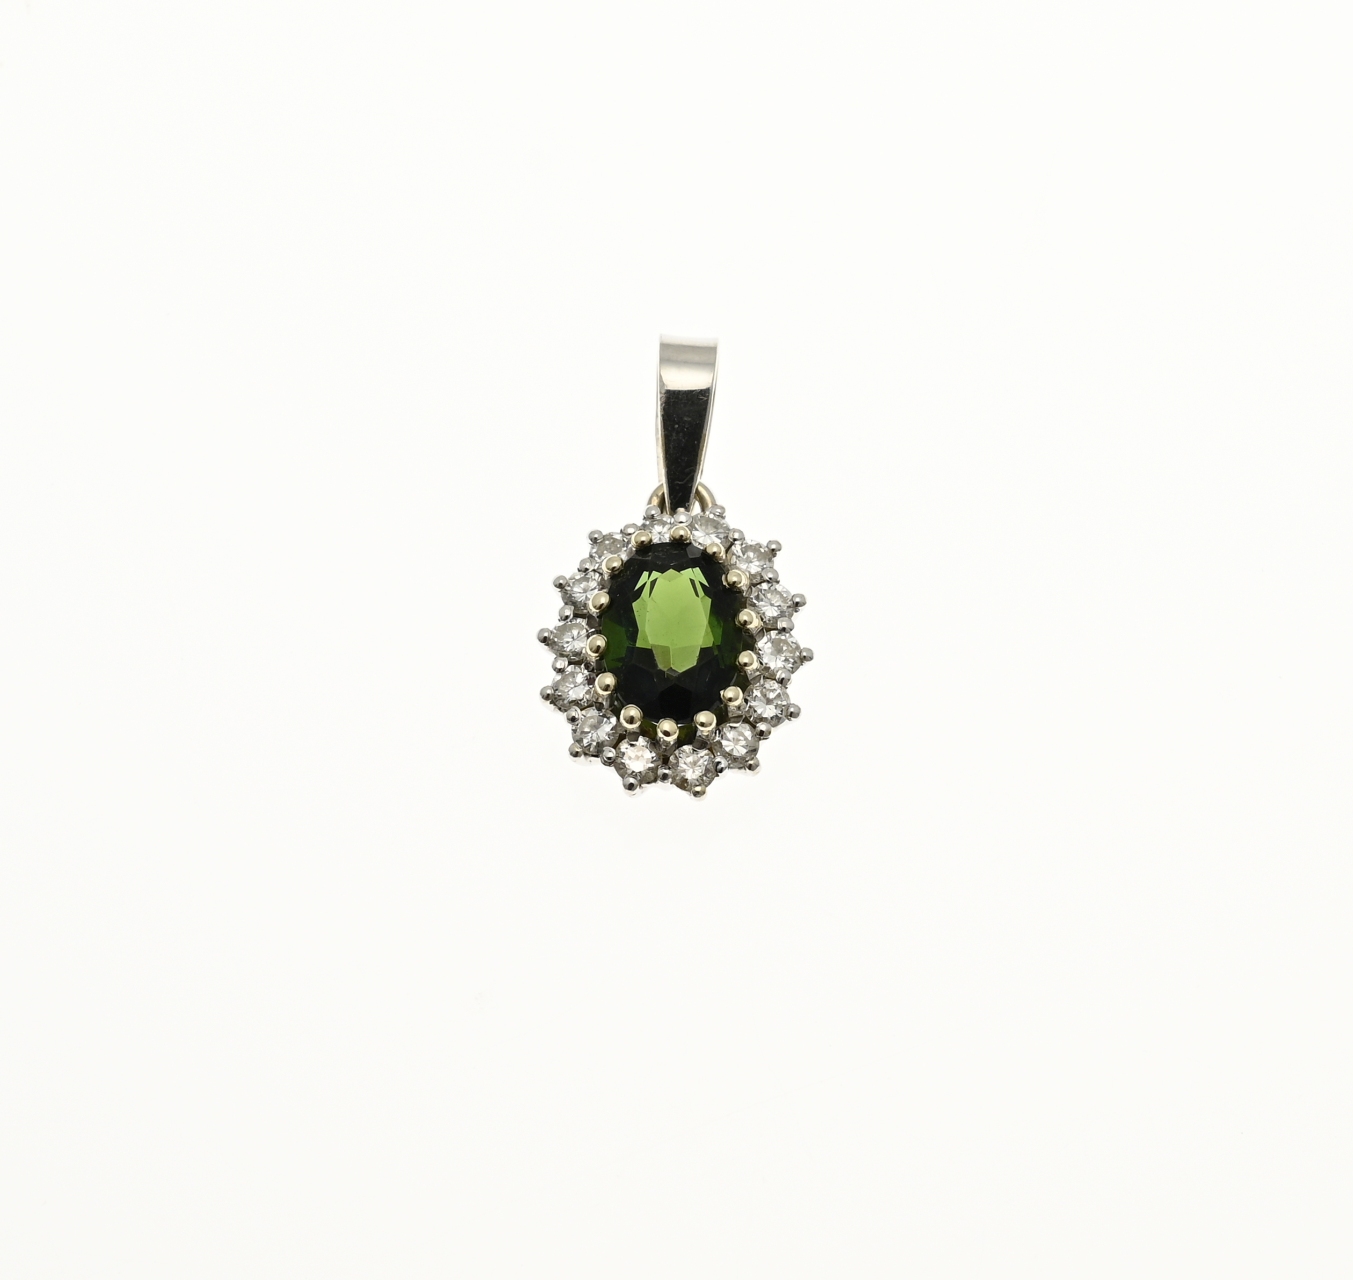 White gold pendant with diamond and green stone